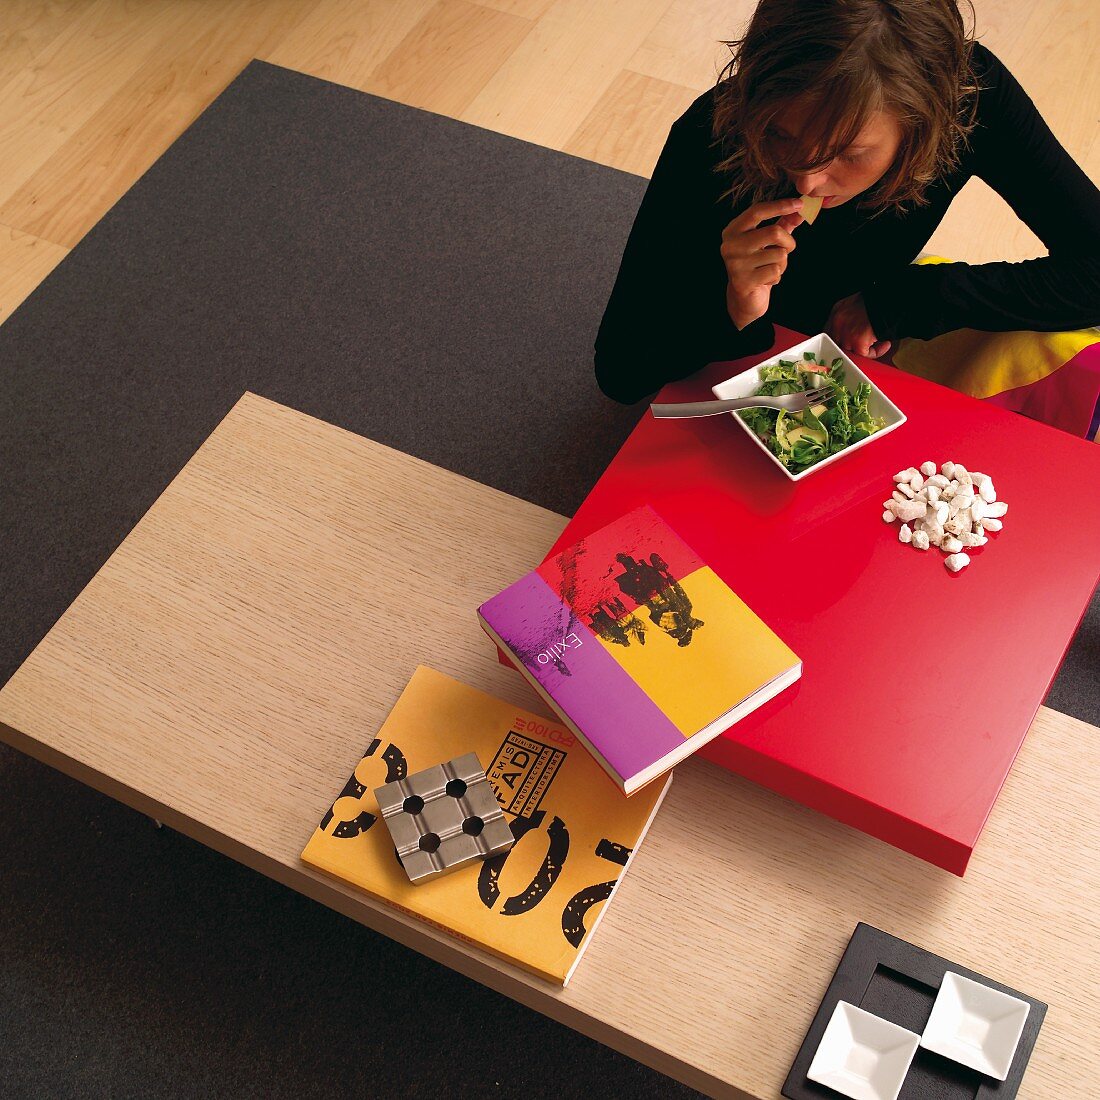 Woman eating at low table with red tabletop above wooden surface